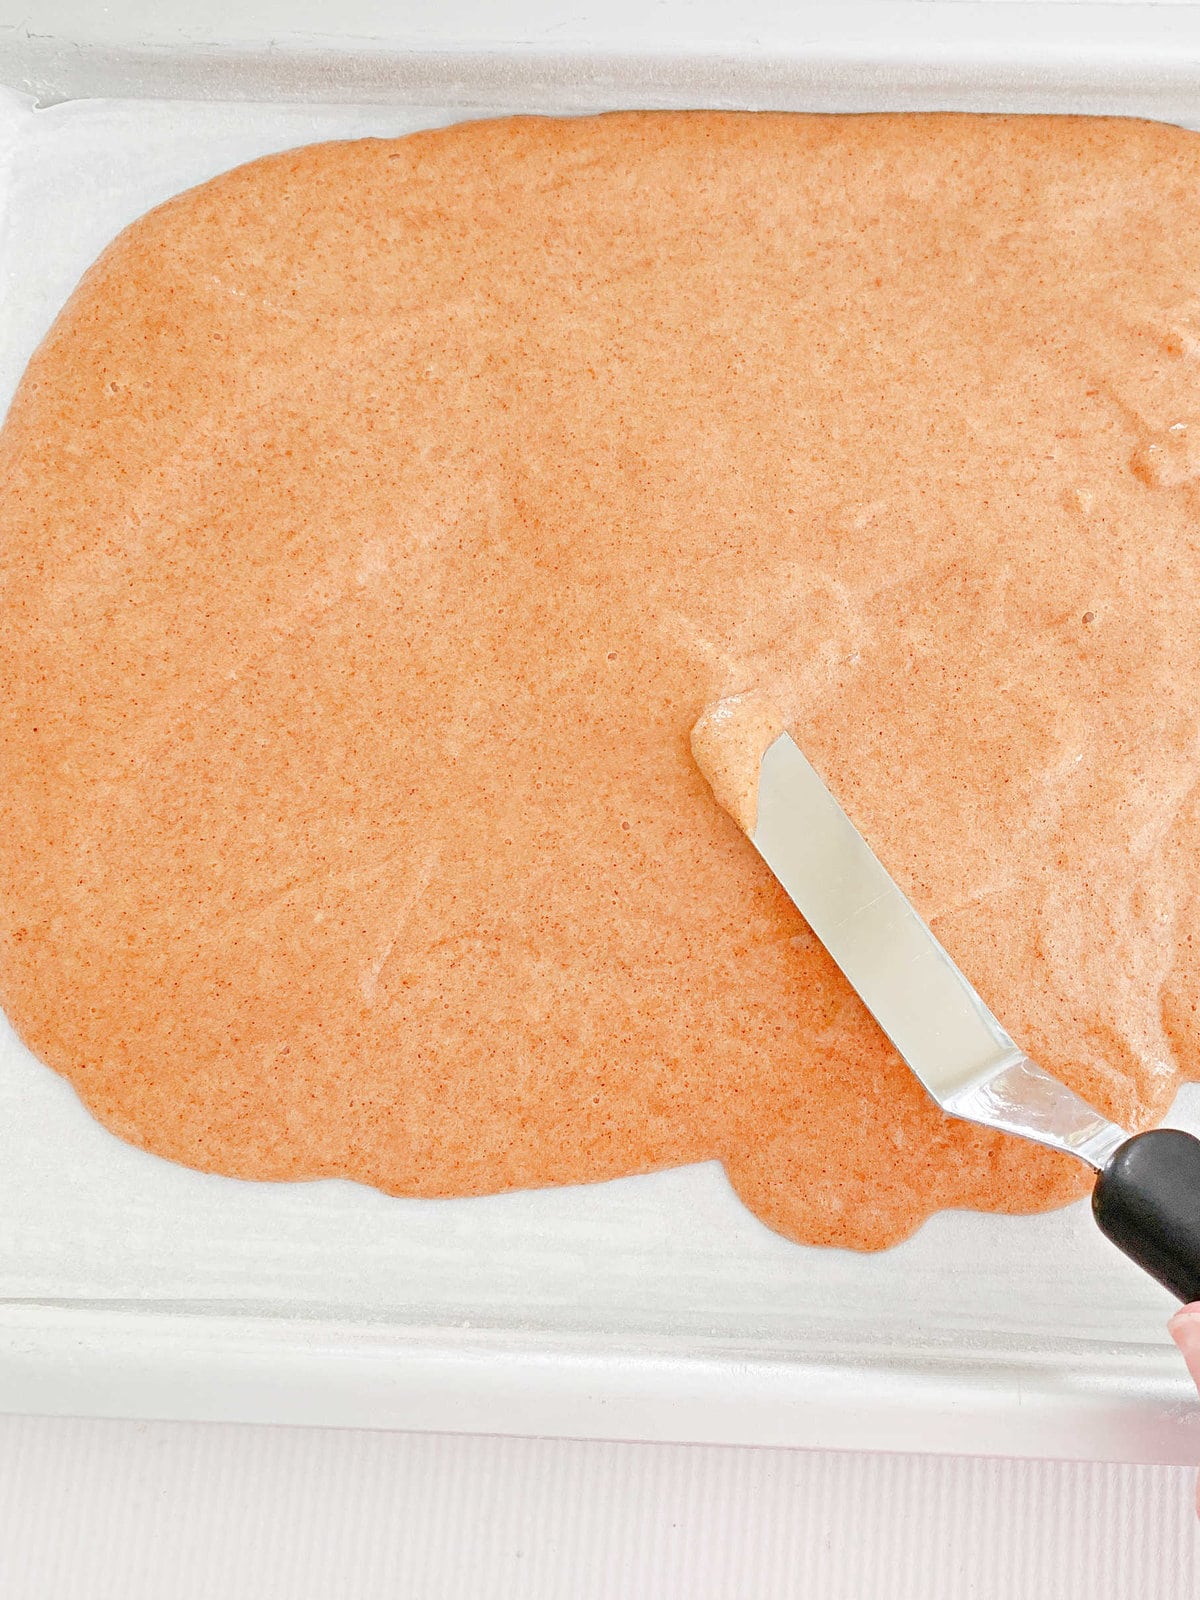 Spreading pumpkin roll batter into parchment lined sheet pan.